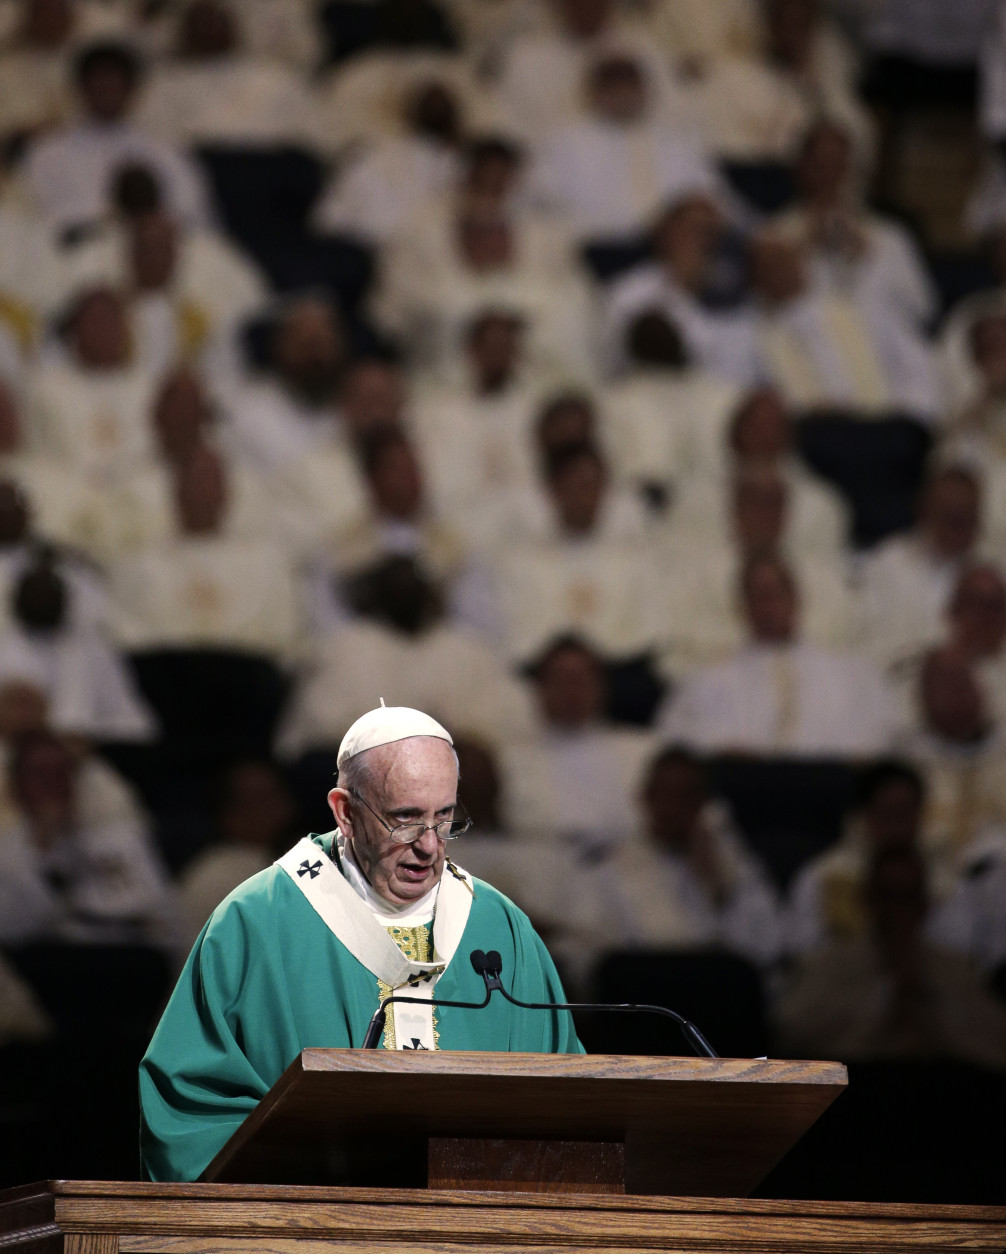 NEW YORK, NY - SEPTEMBER 25:  Pope Francis reads his homily while celebrating Mass at Madison Square Garden on September 25, 2015 in New York City. Pope Francis is visiting New York City during a six-day tour of the United States, with stops in Washington D.C., New York City and Philadelphia, PA. (Photo by Julie Jacobson-Pool/Getty Images)